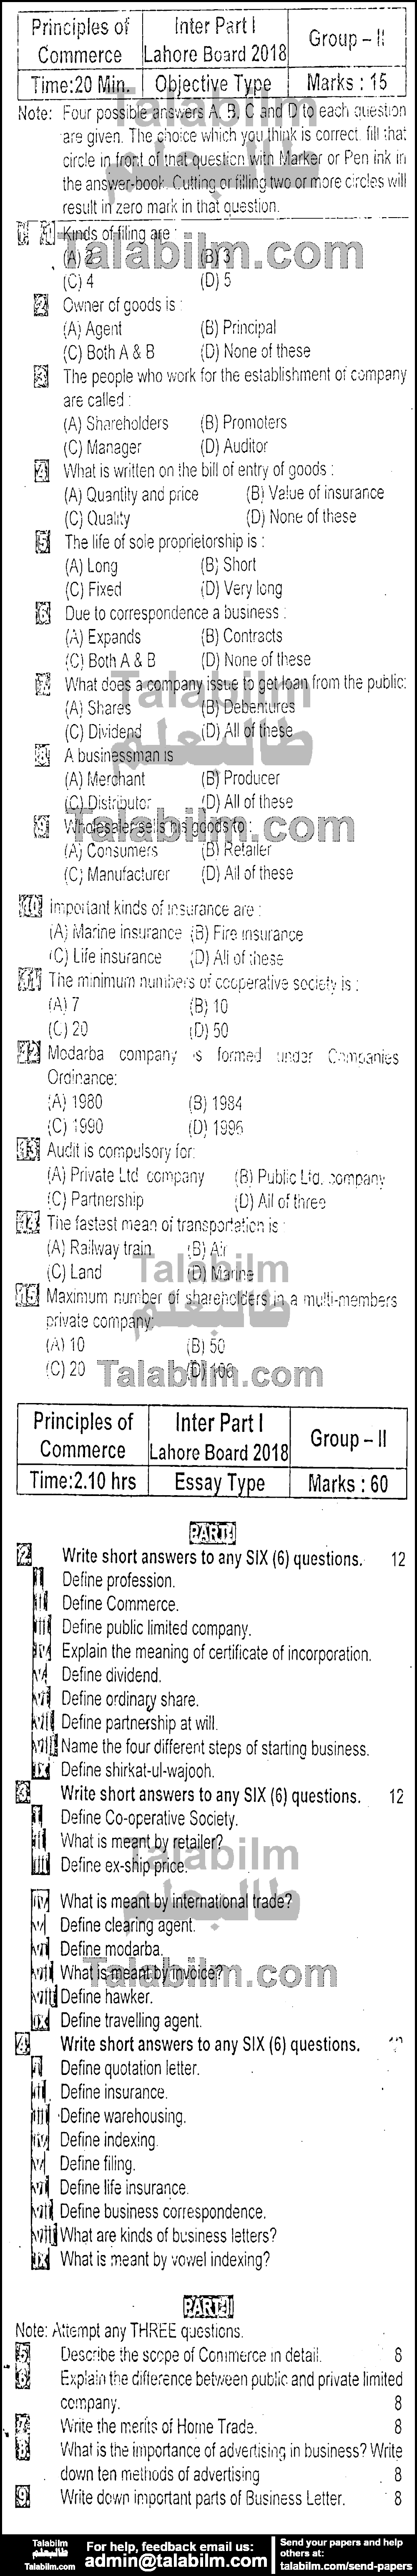 Principles Of Commerce 0 past paper for Group-II 2018